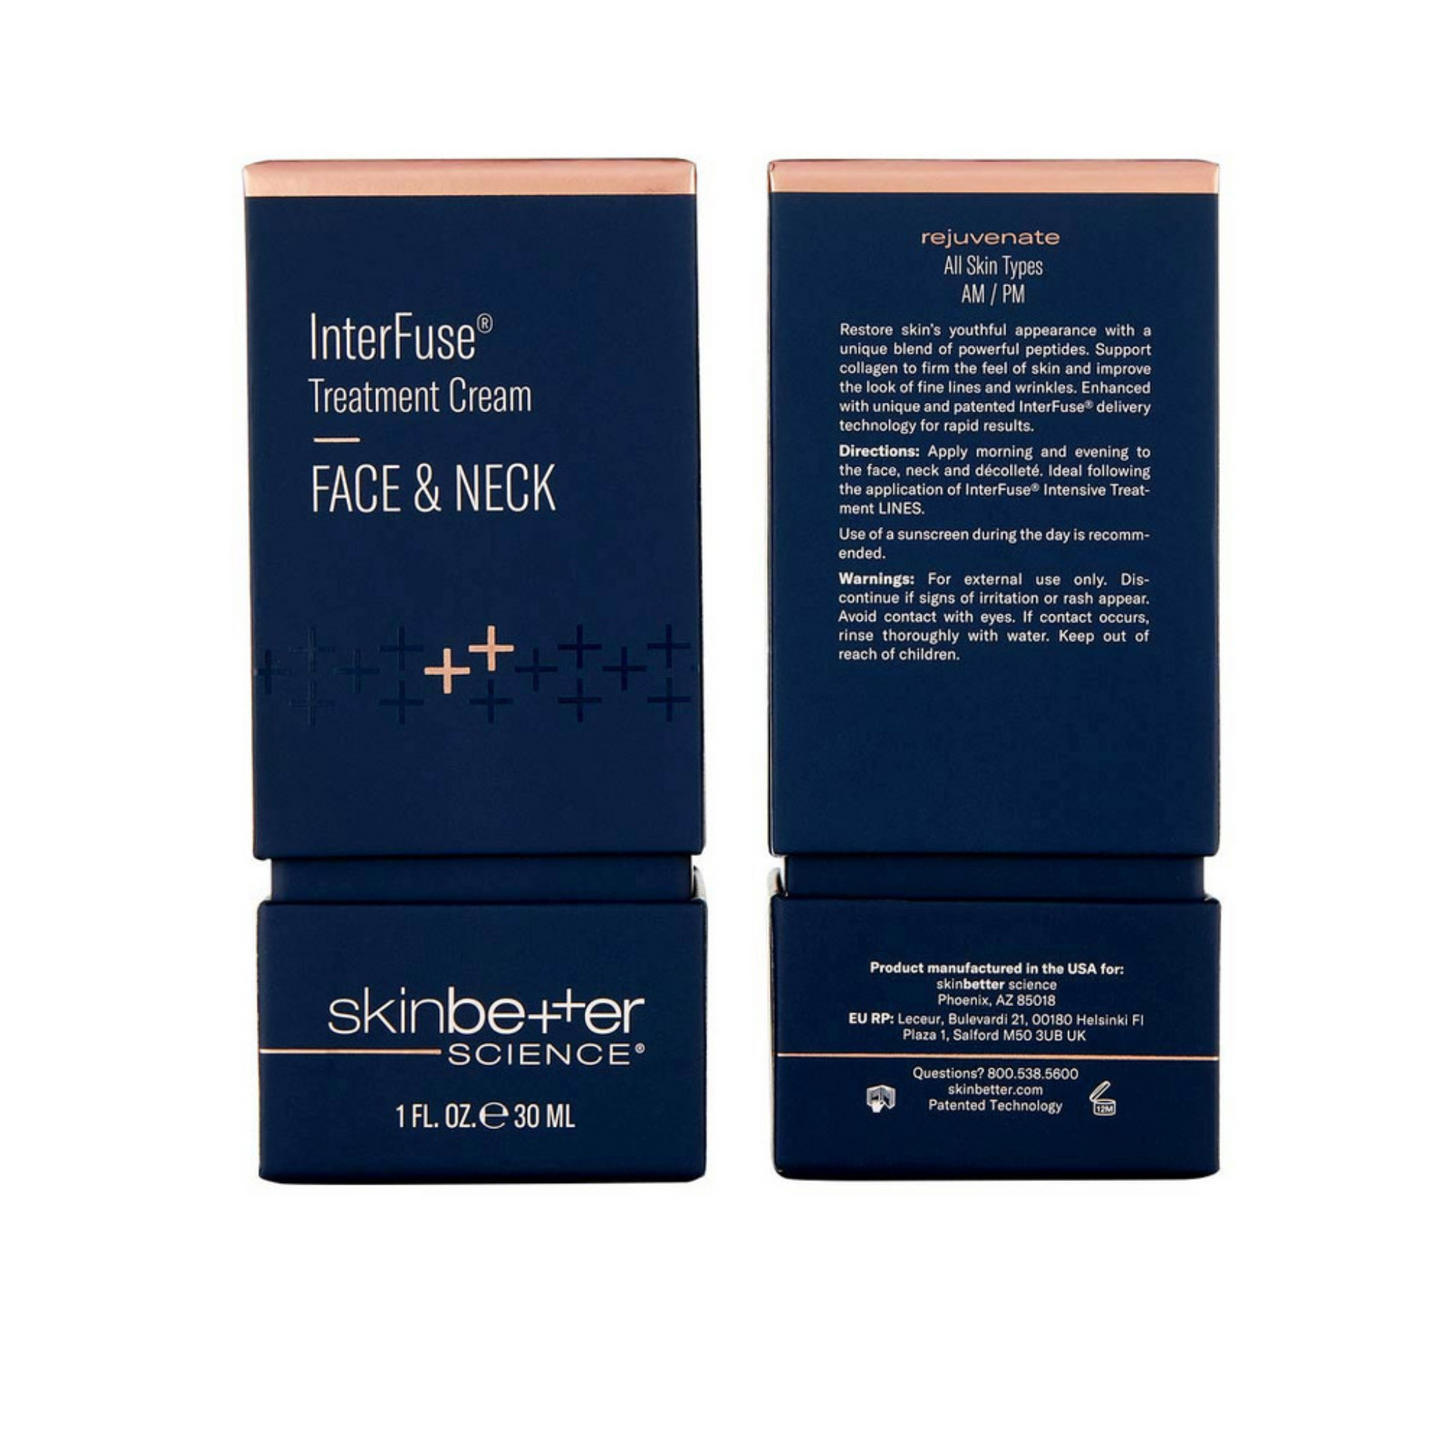 InterFuse Treatment Cream FACE & NECK | skinbetter science®